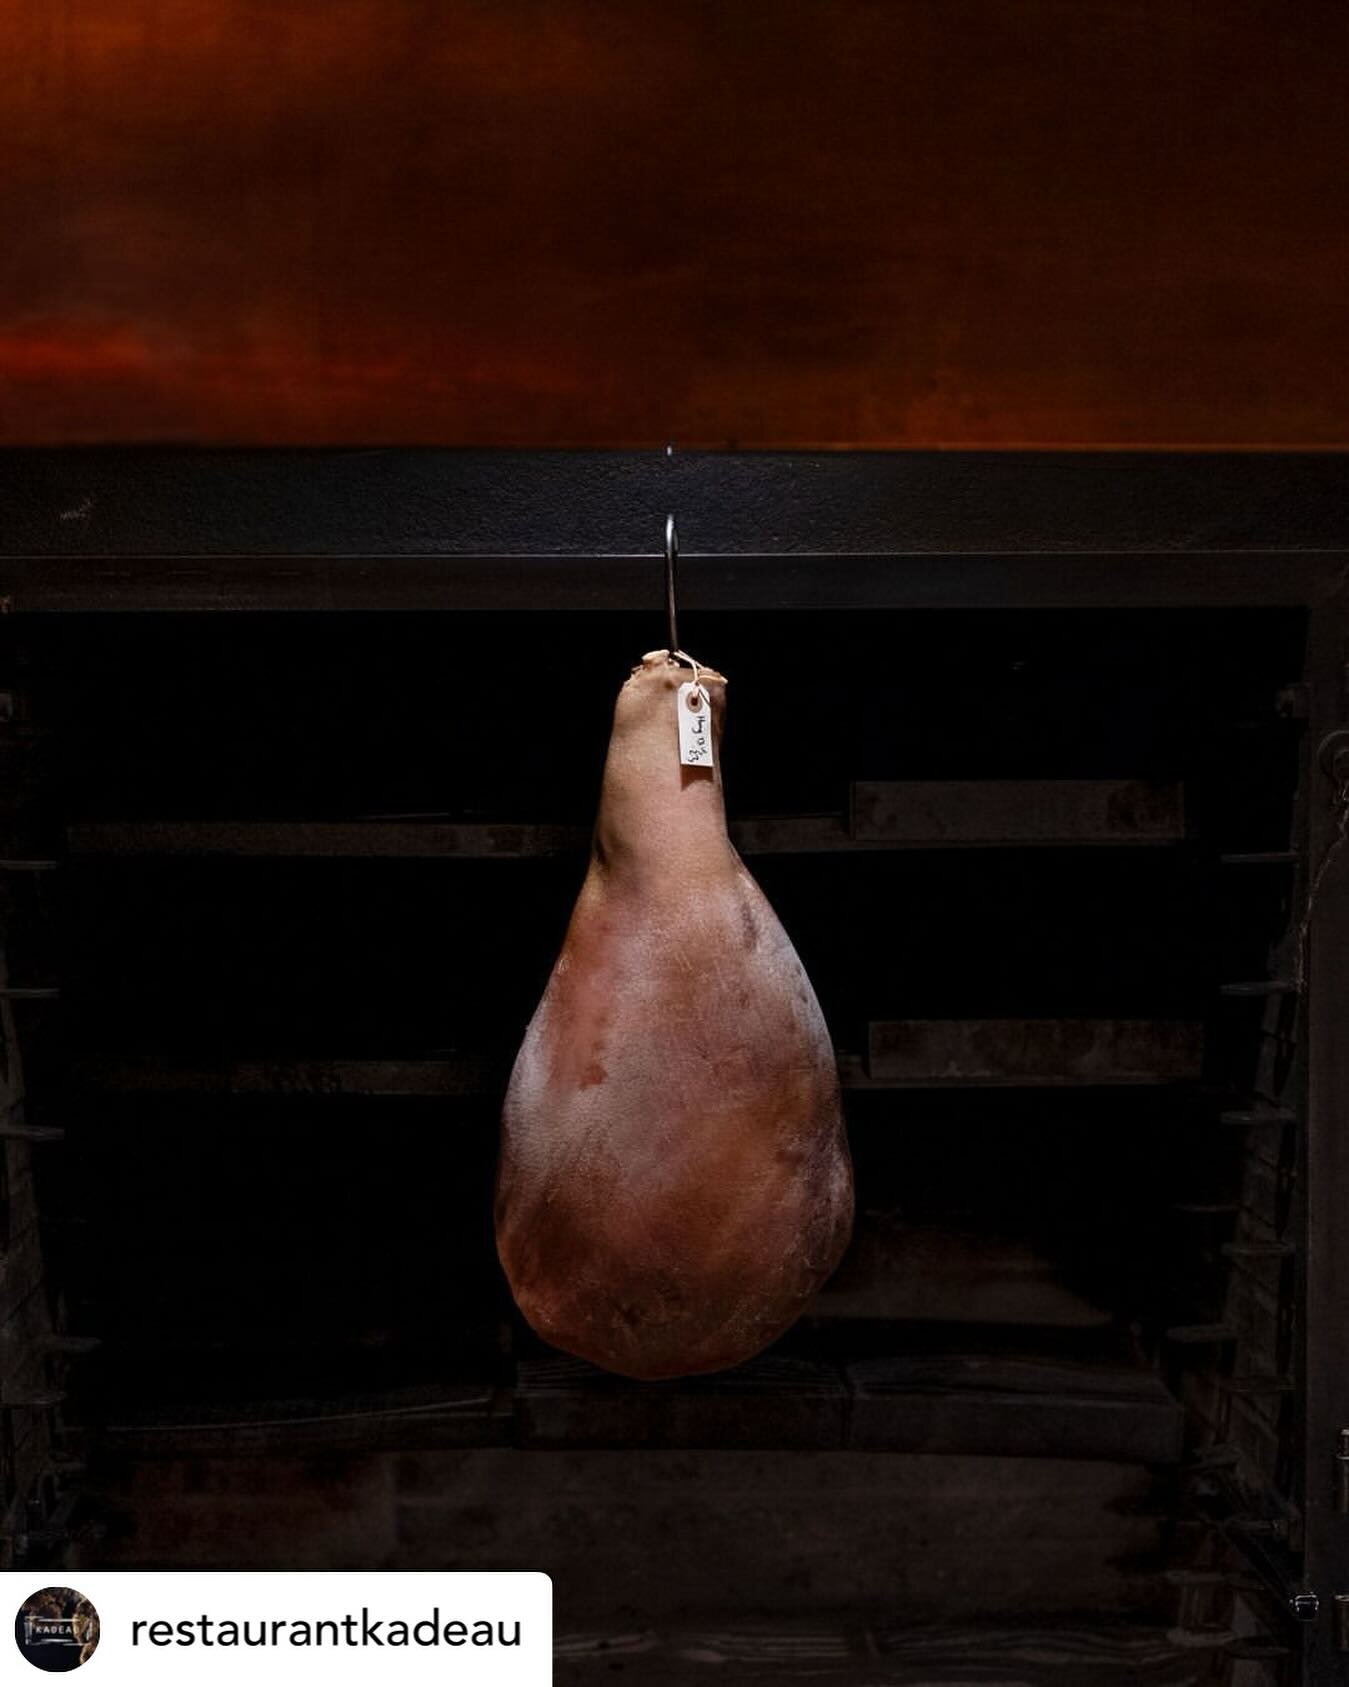 &bull; @restaurantkadeau Salted ham &mdash;⁠
⁠
We salt the pork for six weeks before commencing the two-year aging process.
⁠
Due to the simplicity of ingredients (salt, pork and time), the quality of the meat is, of course, crucial.⁠
⁠
We source the